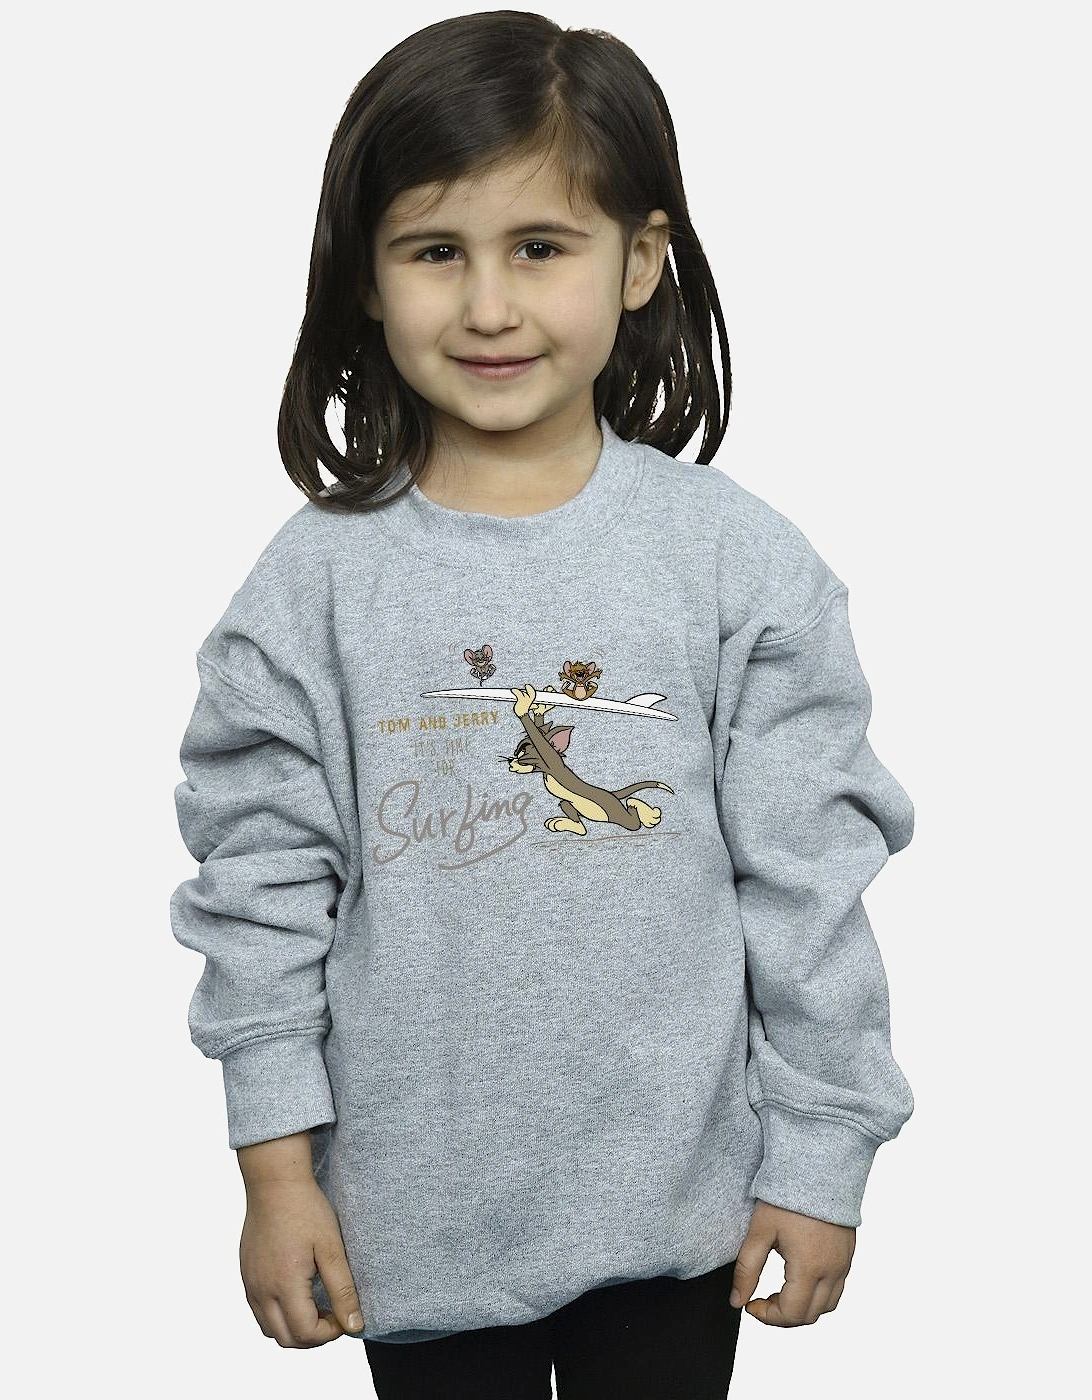 Tom And Jerry Girls It?'s Time For Surfing Sweatshirt